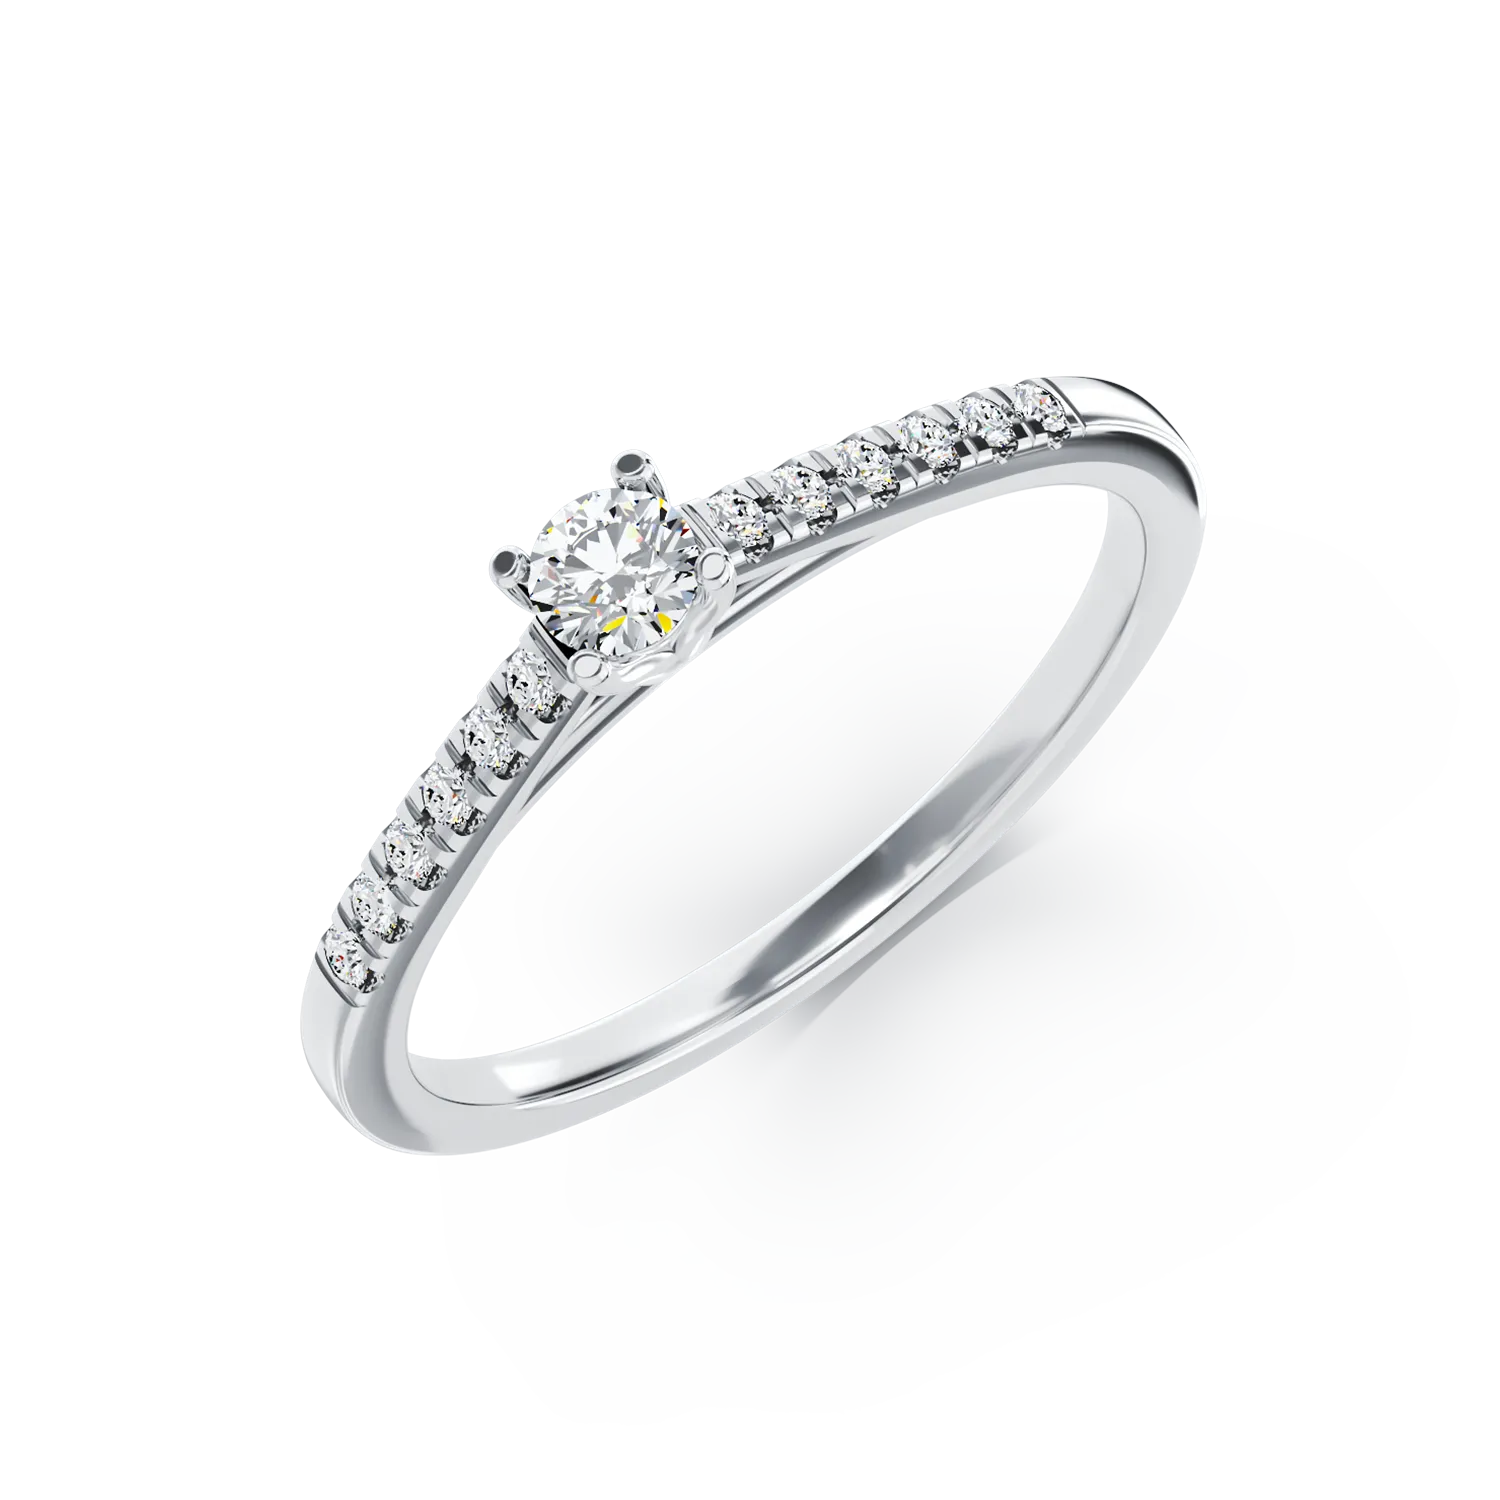 18K white gold engagement ring with 0.305ct diamond and 0.13ct diamonds